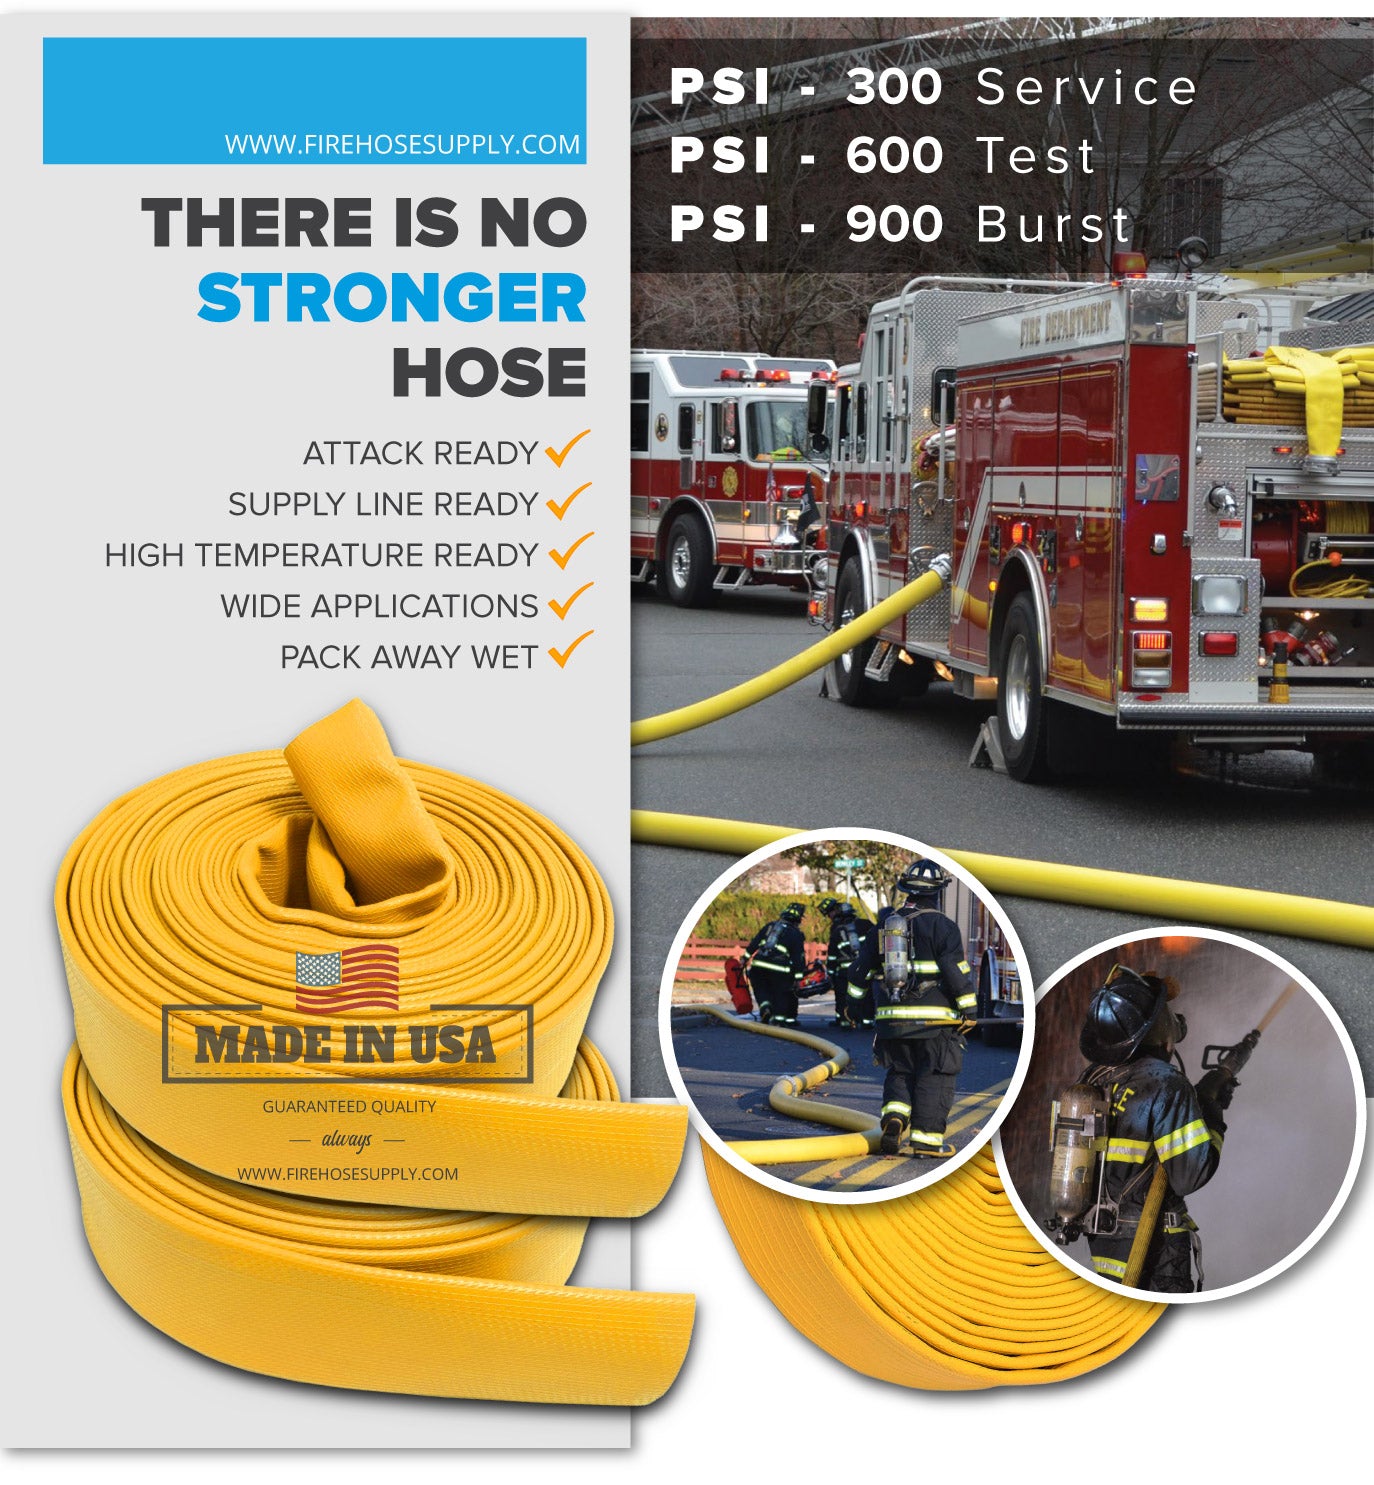 1.5 Inch Rubber Fire Hose Material Only Supply And Attack Ready Firefighter Yellow 600 PSI Test